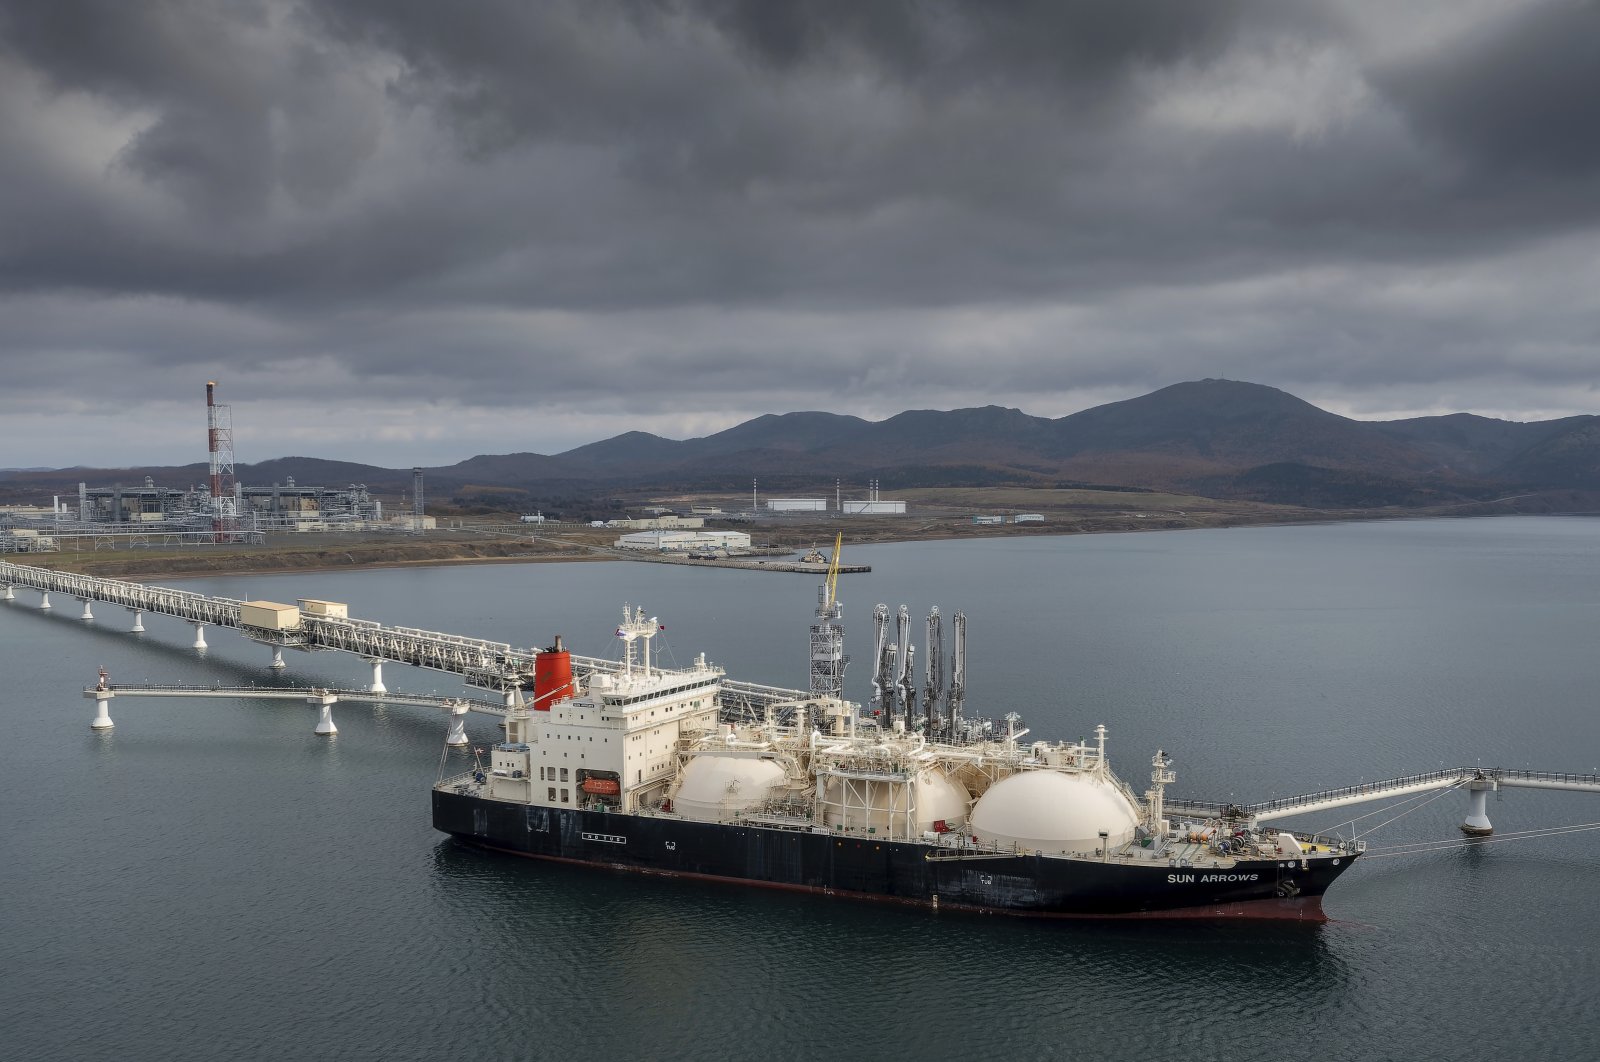 The tanker Sun Arrows loads its cargo of liquefied natural gas from the Sakhalin-2 project in the port of Prigorodnoye, Russia, Oct. 29, 2021. (AP Photo)